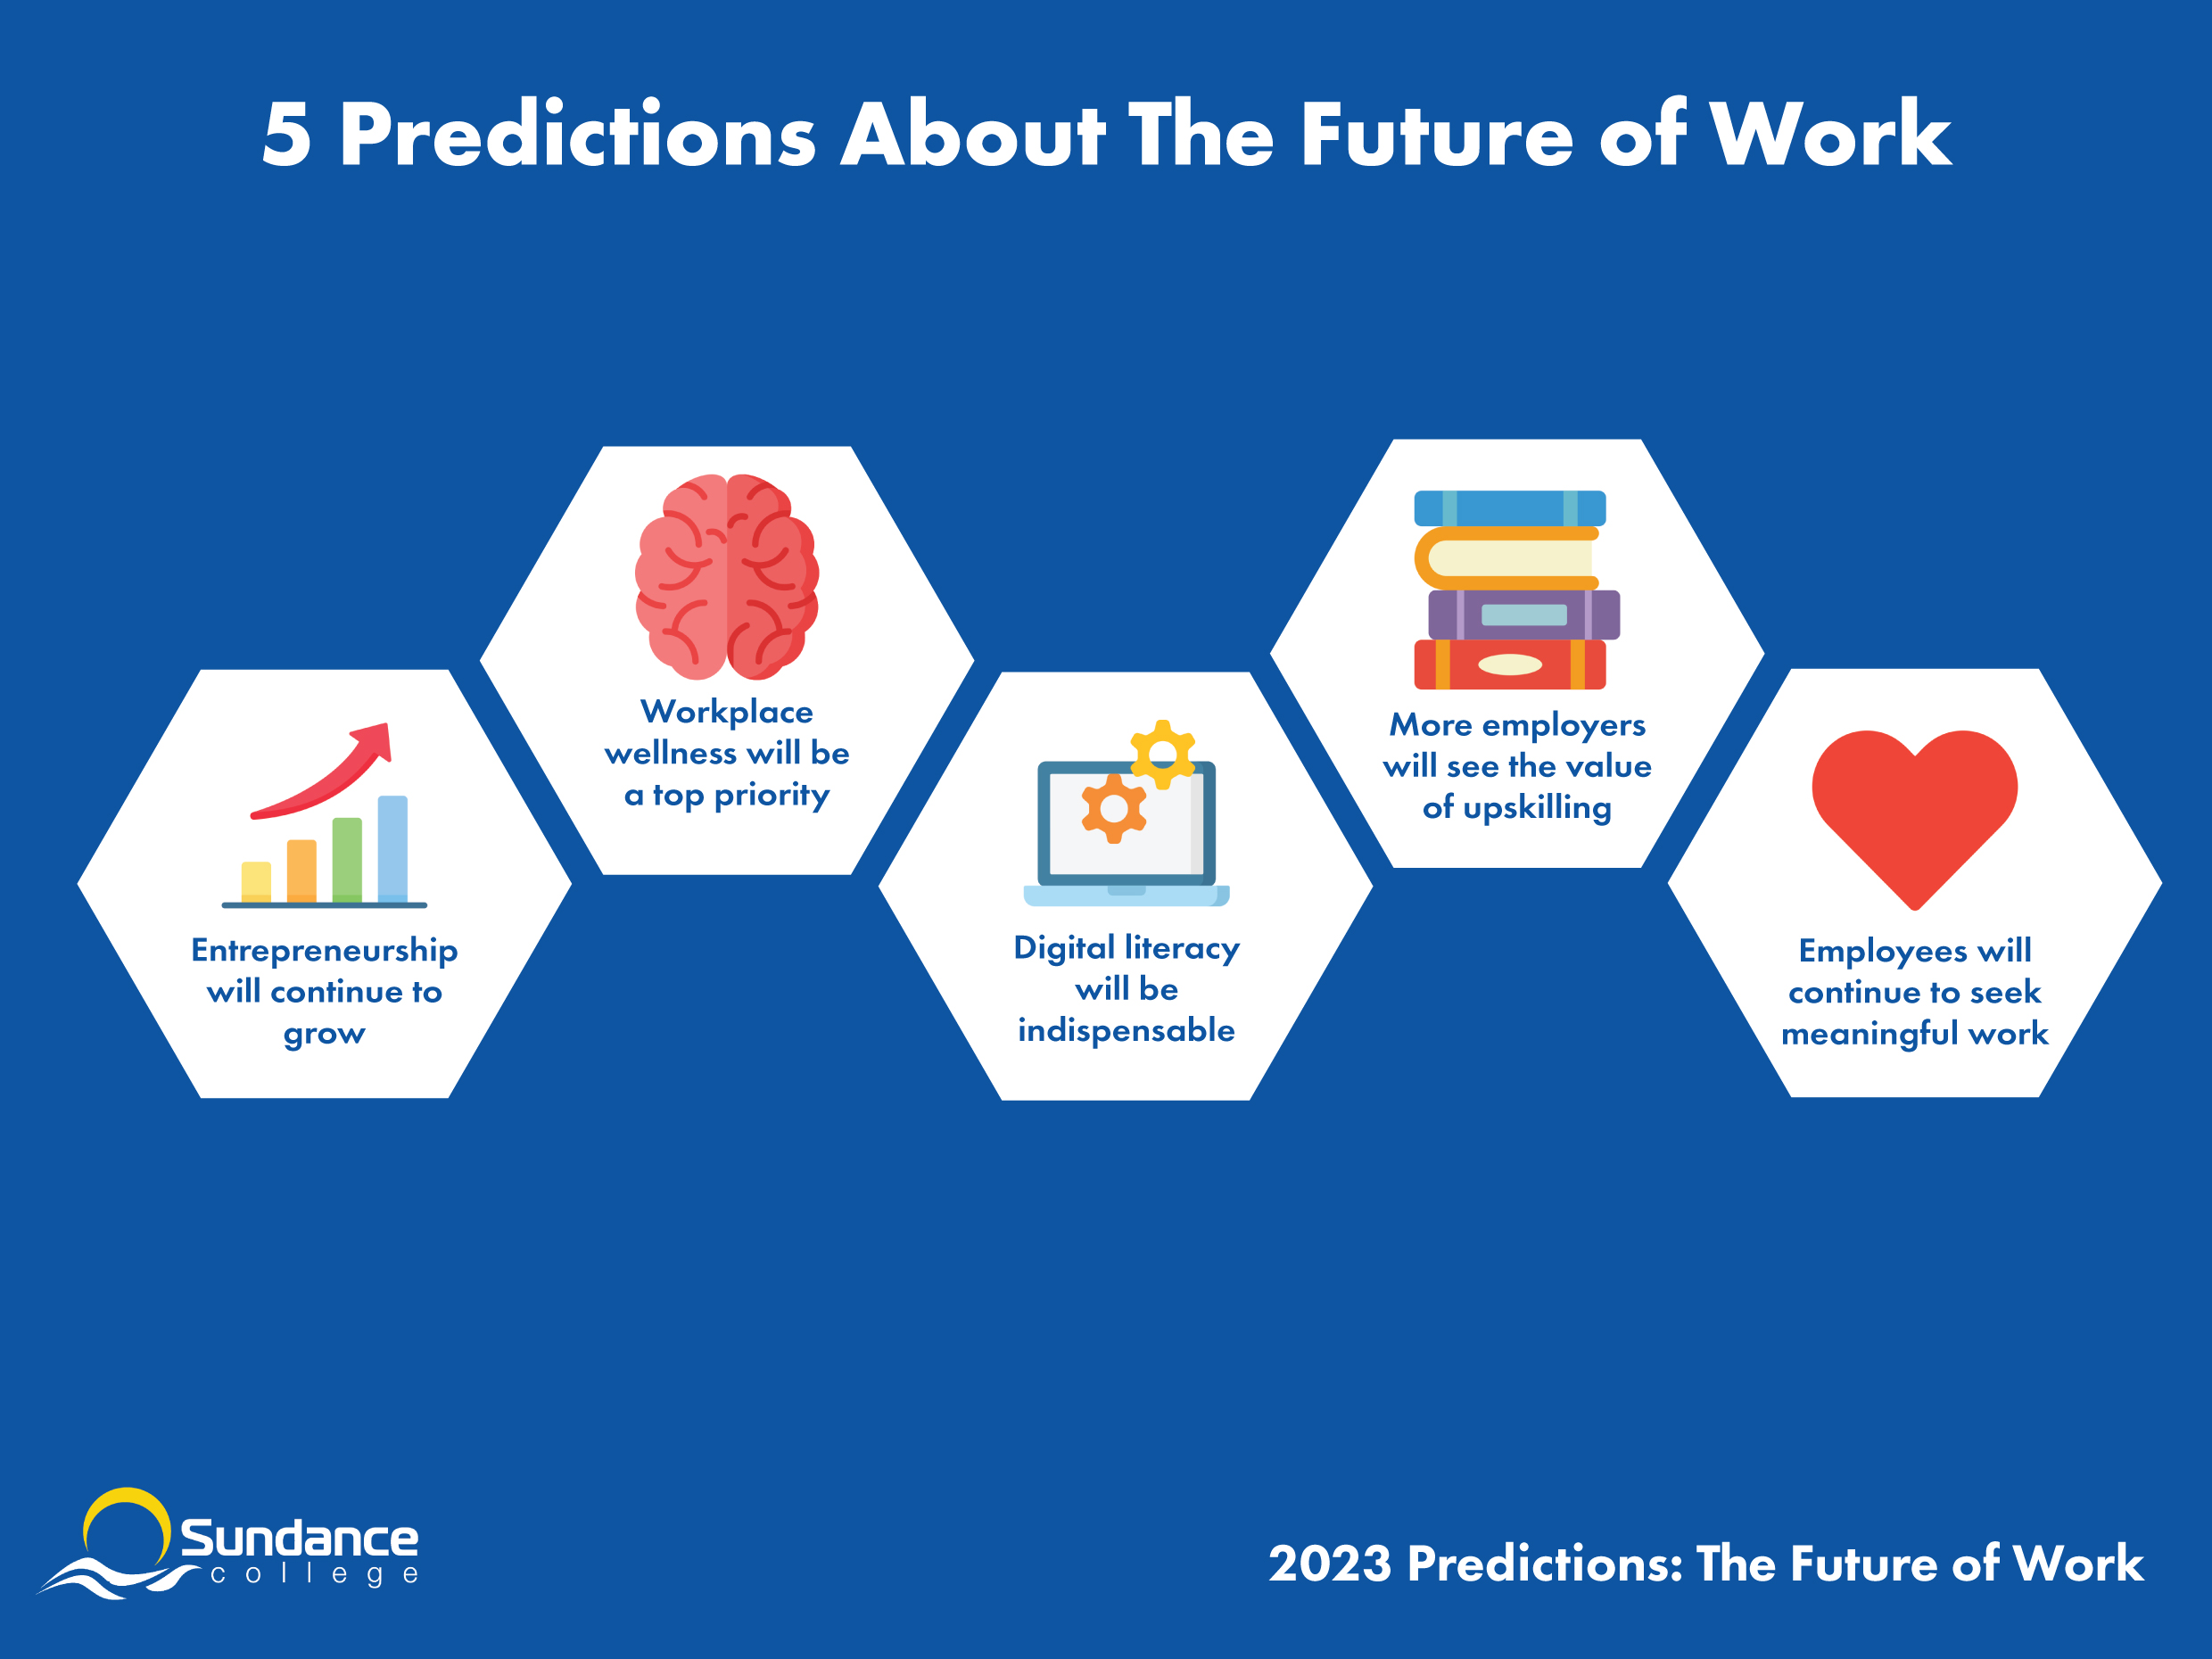 Infographic displaying five predictions about the future of work; entrepreneurship, workplace wellness, digital literacy, upskilling, and meaningful work.